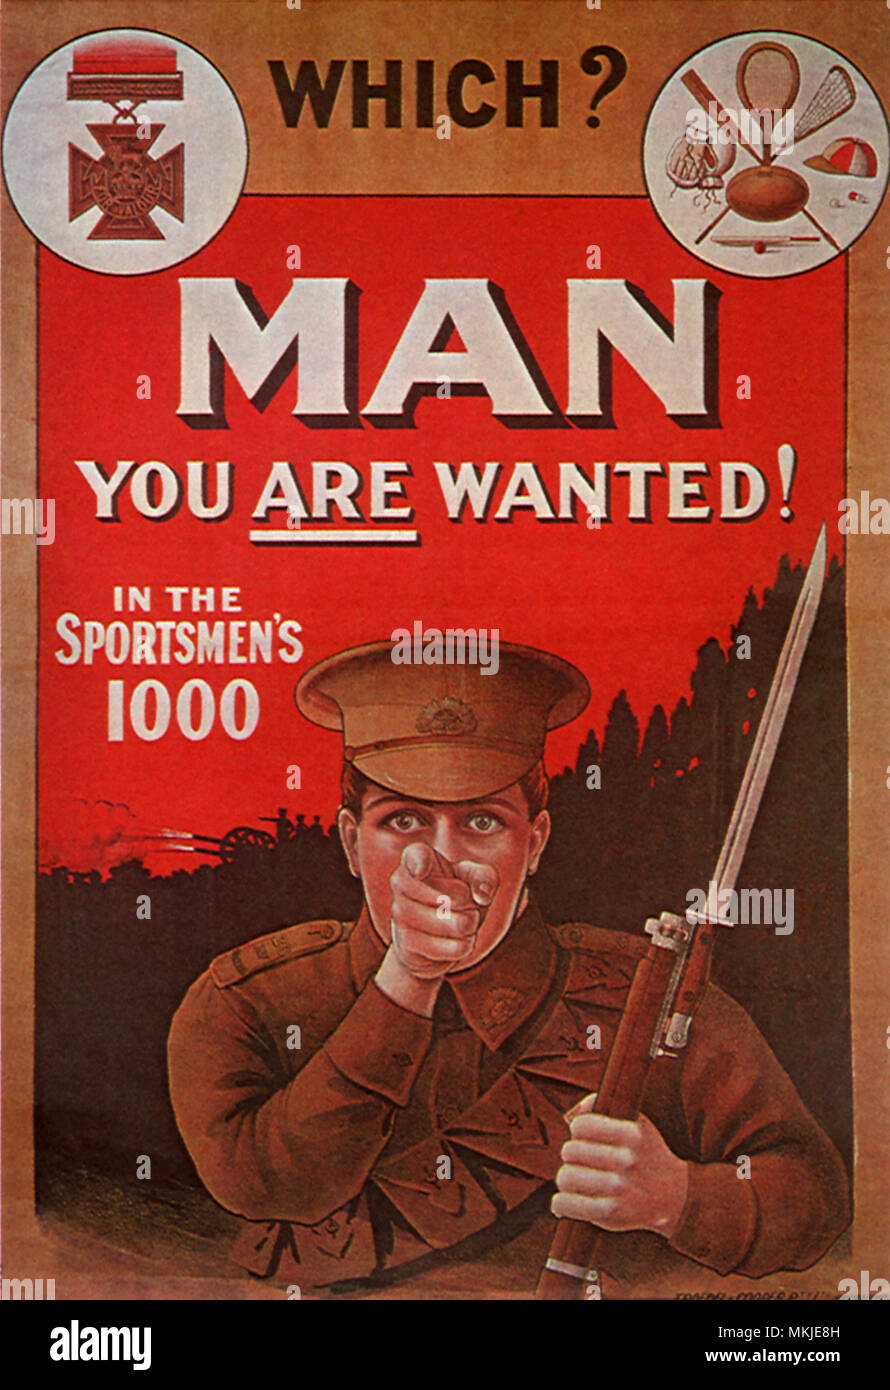 Man You Are Wanted Stock Photo